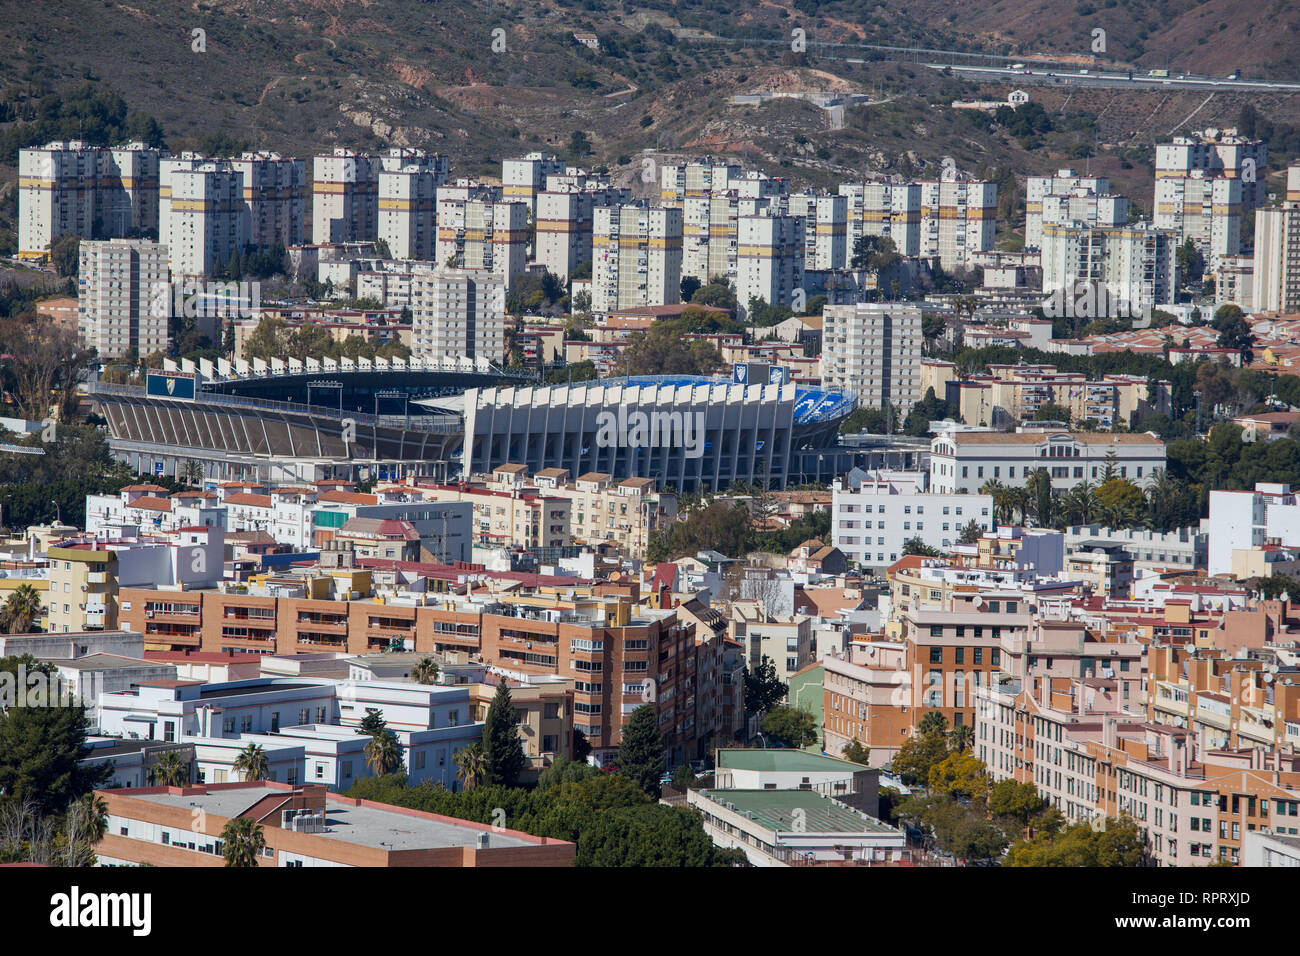 A long distance view of La Rosaleda Stadium home of Málaga Club de Fútbol who play in the second division of La Liga in Southern Spain Stock Photo